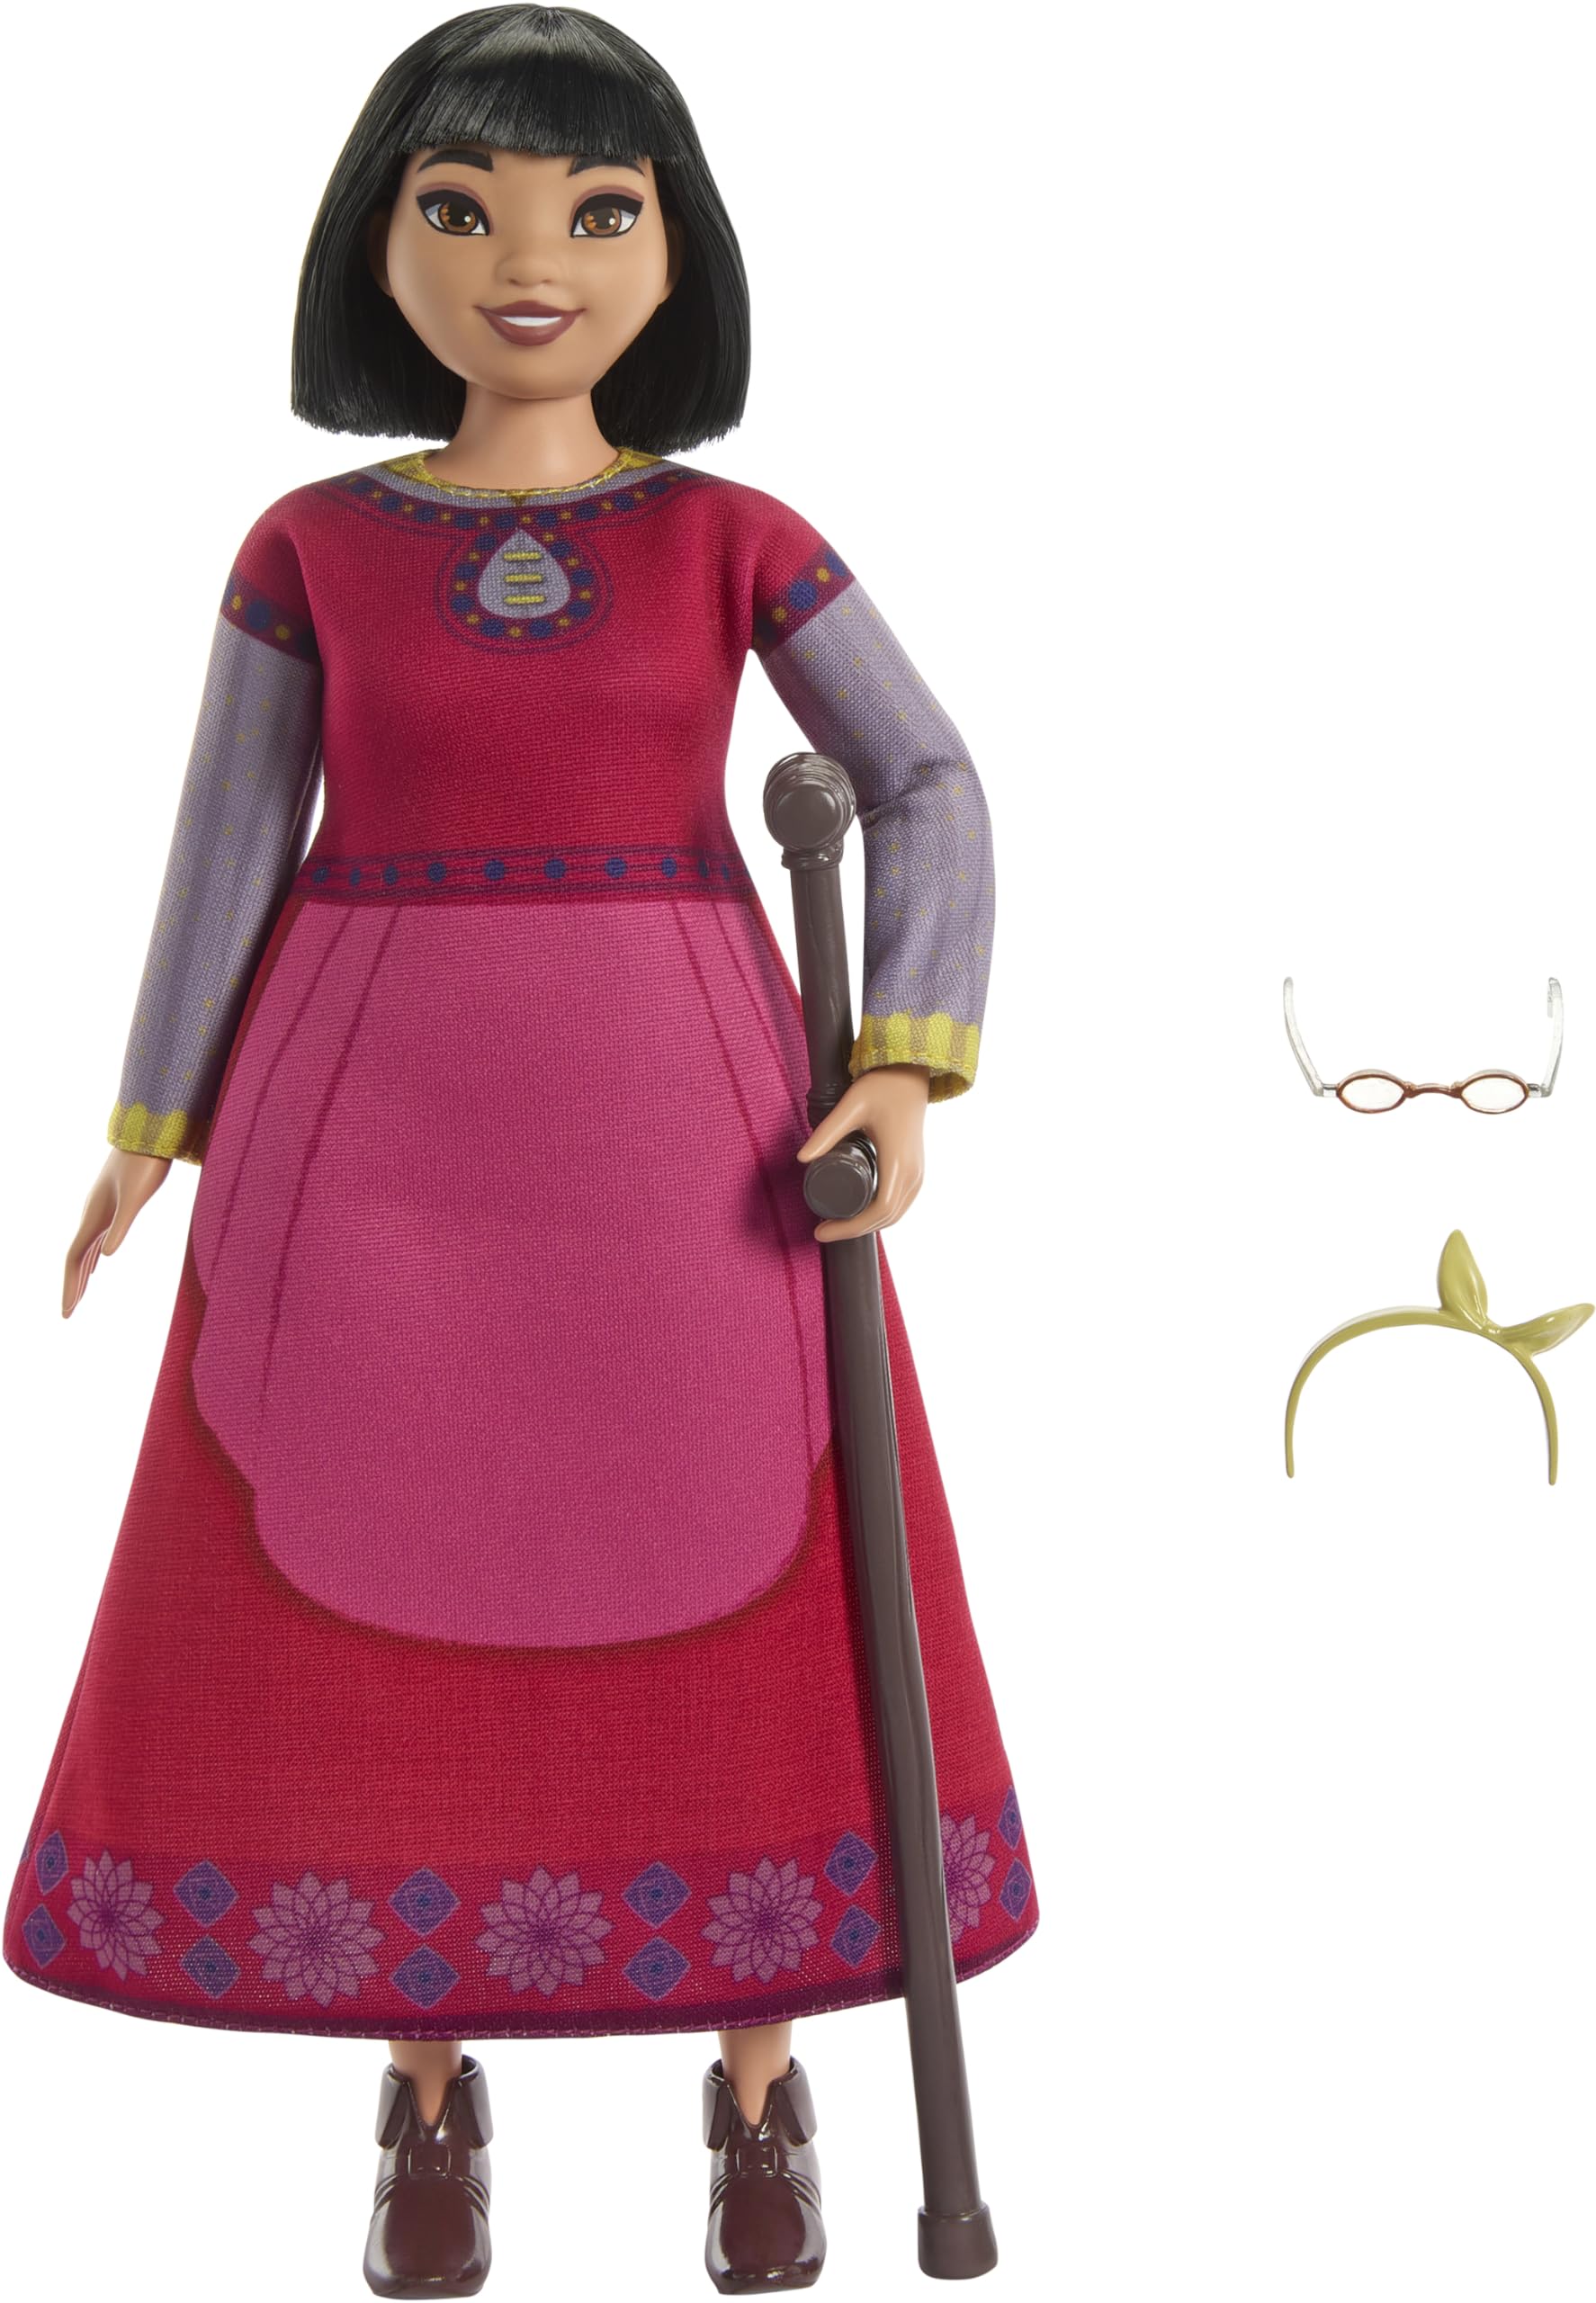 Mattel Disney's Wish Dahlia of Rosas Posable Fashion Doll, Including Removable Clothes and Accessories